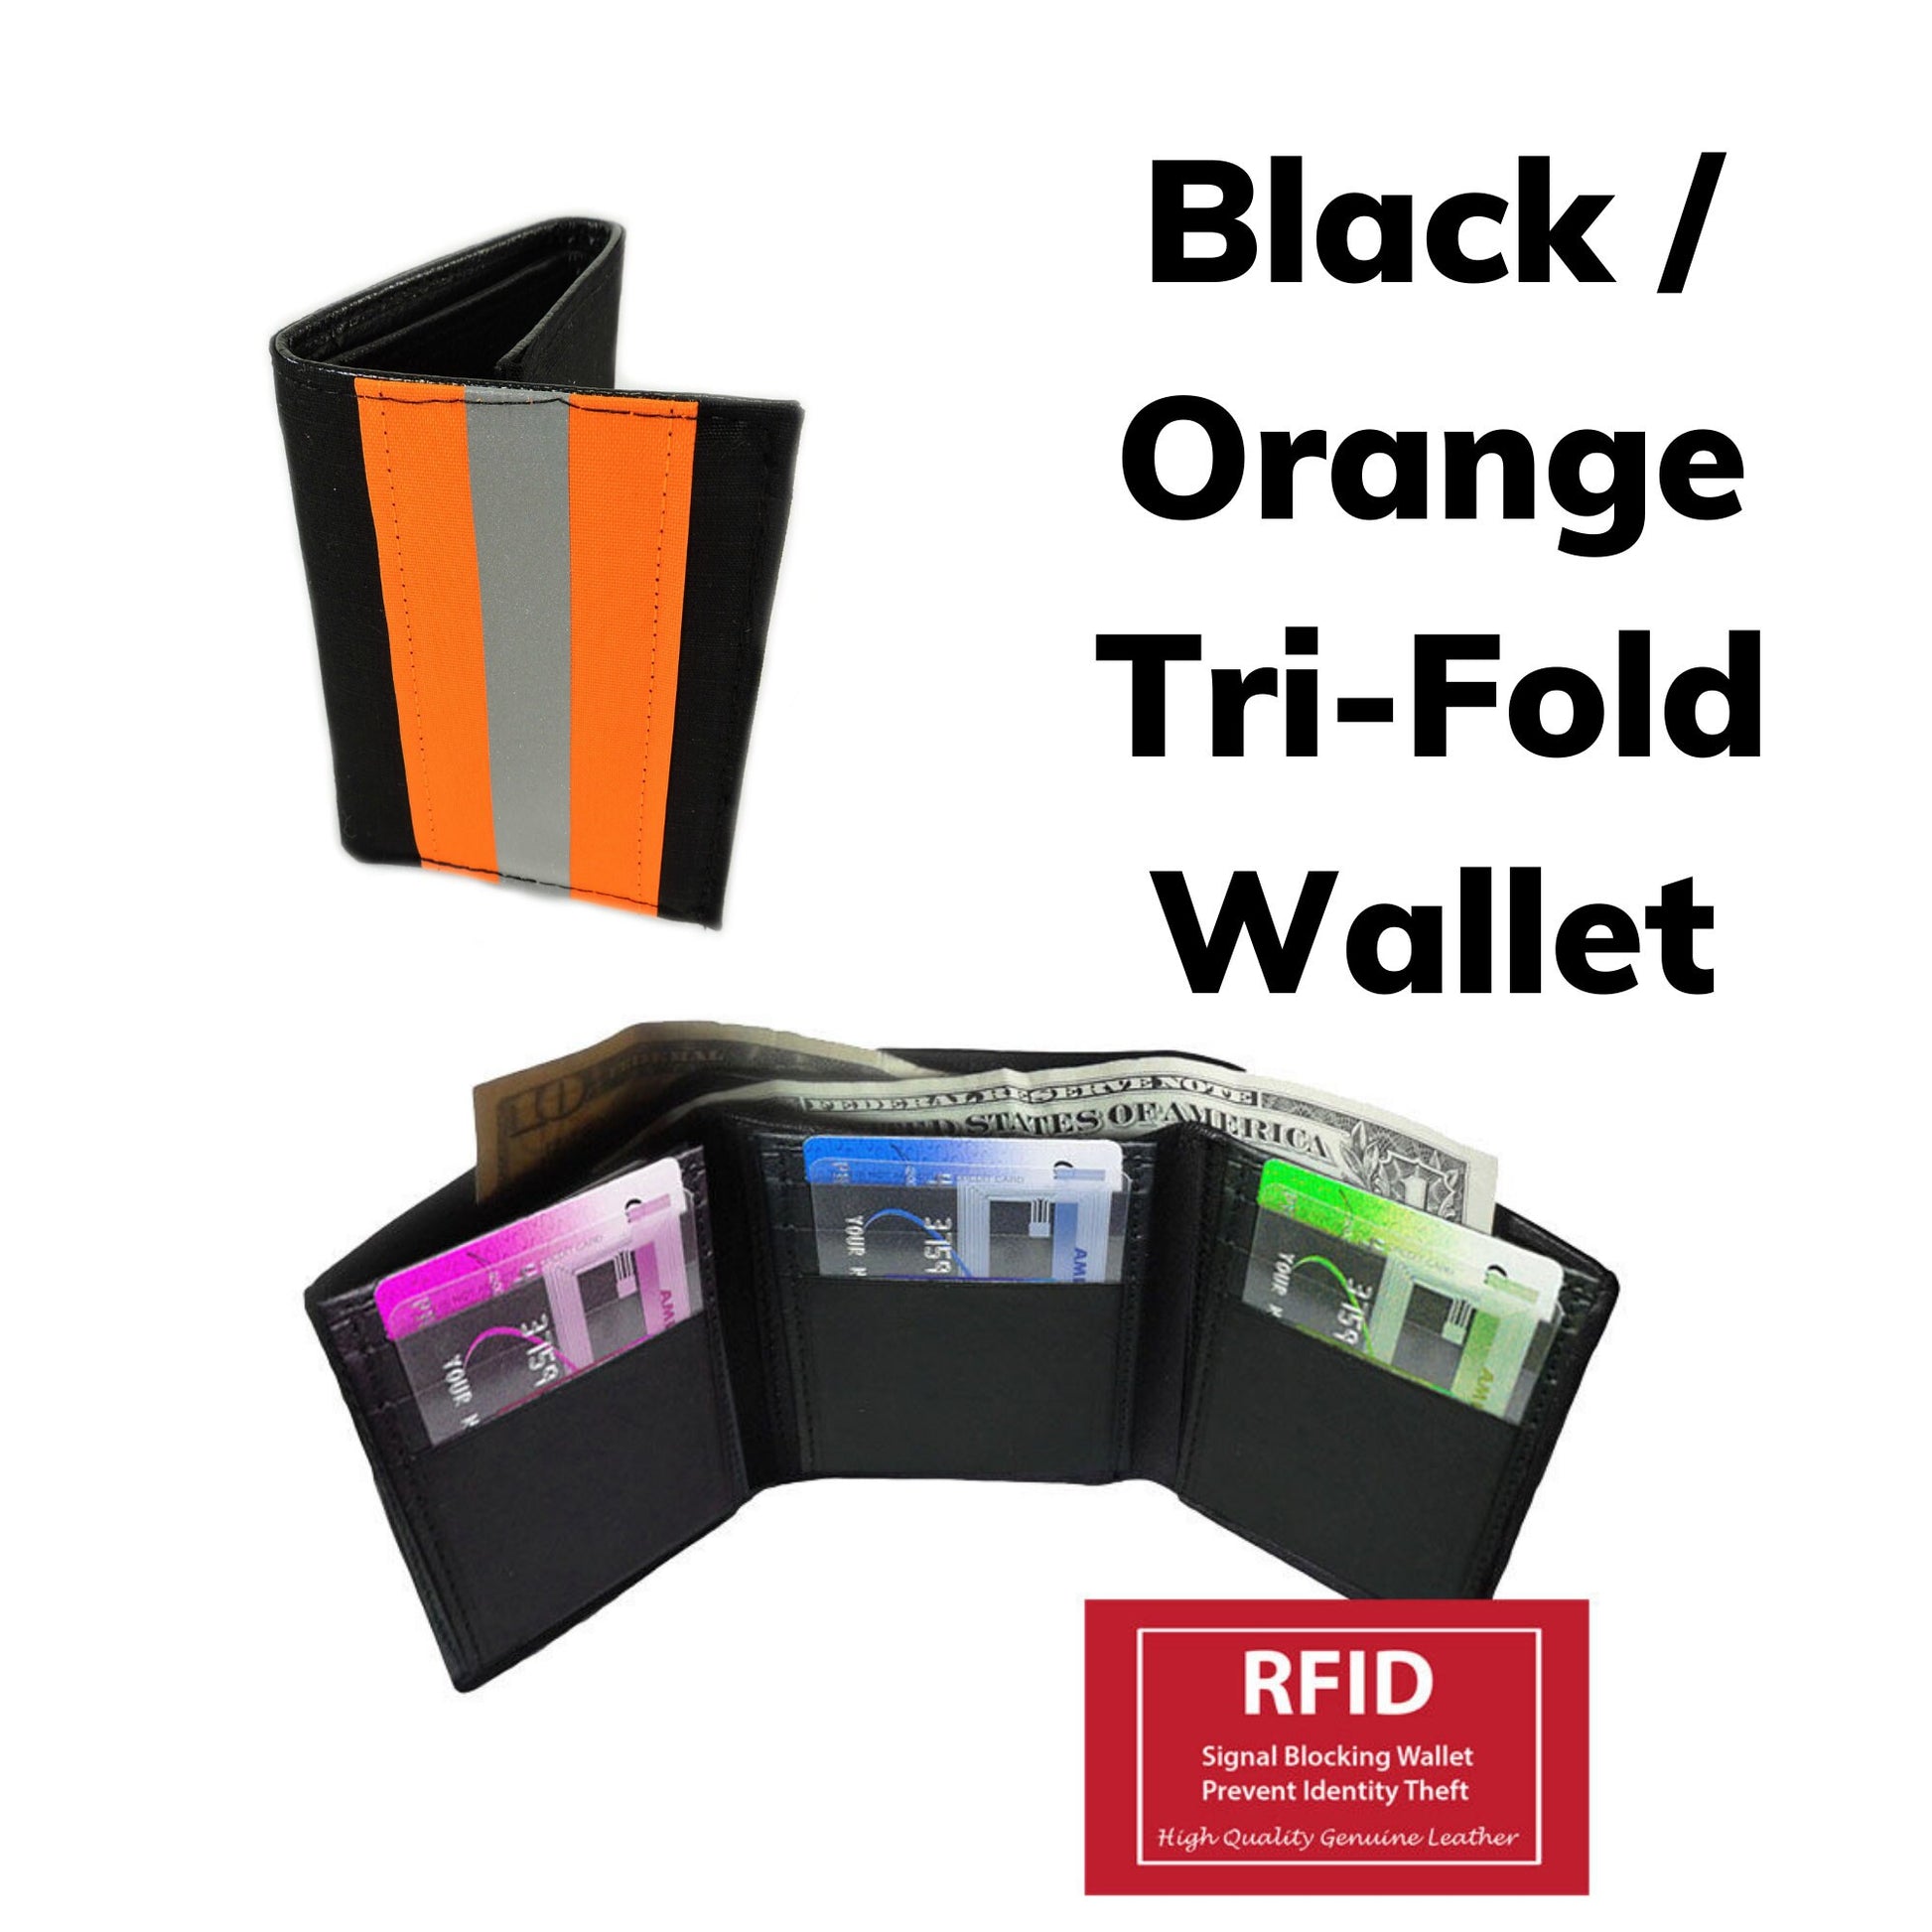 black fabric with orange reflective tape wallet with RFID